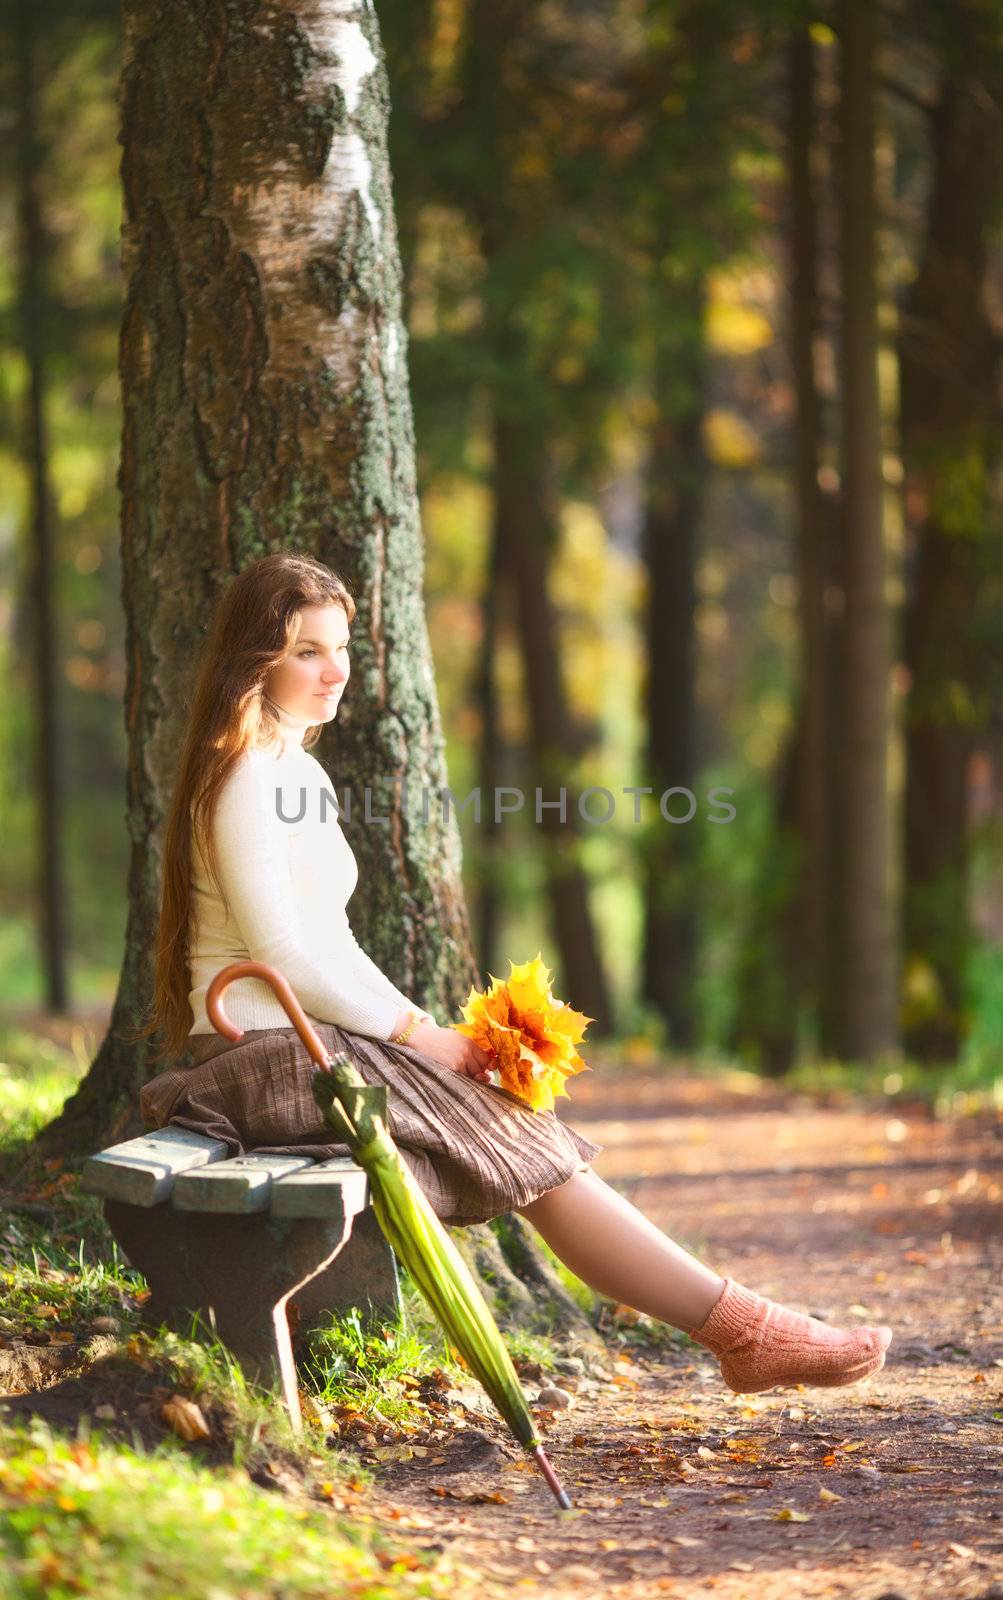 beautiful girl with leaves sitting on bench in autumn park